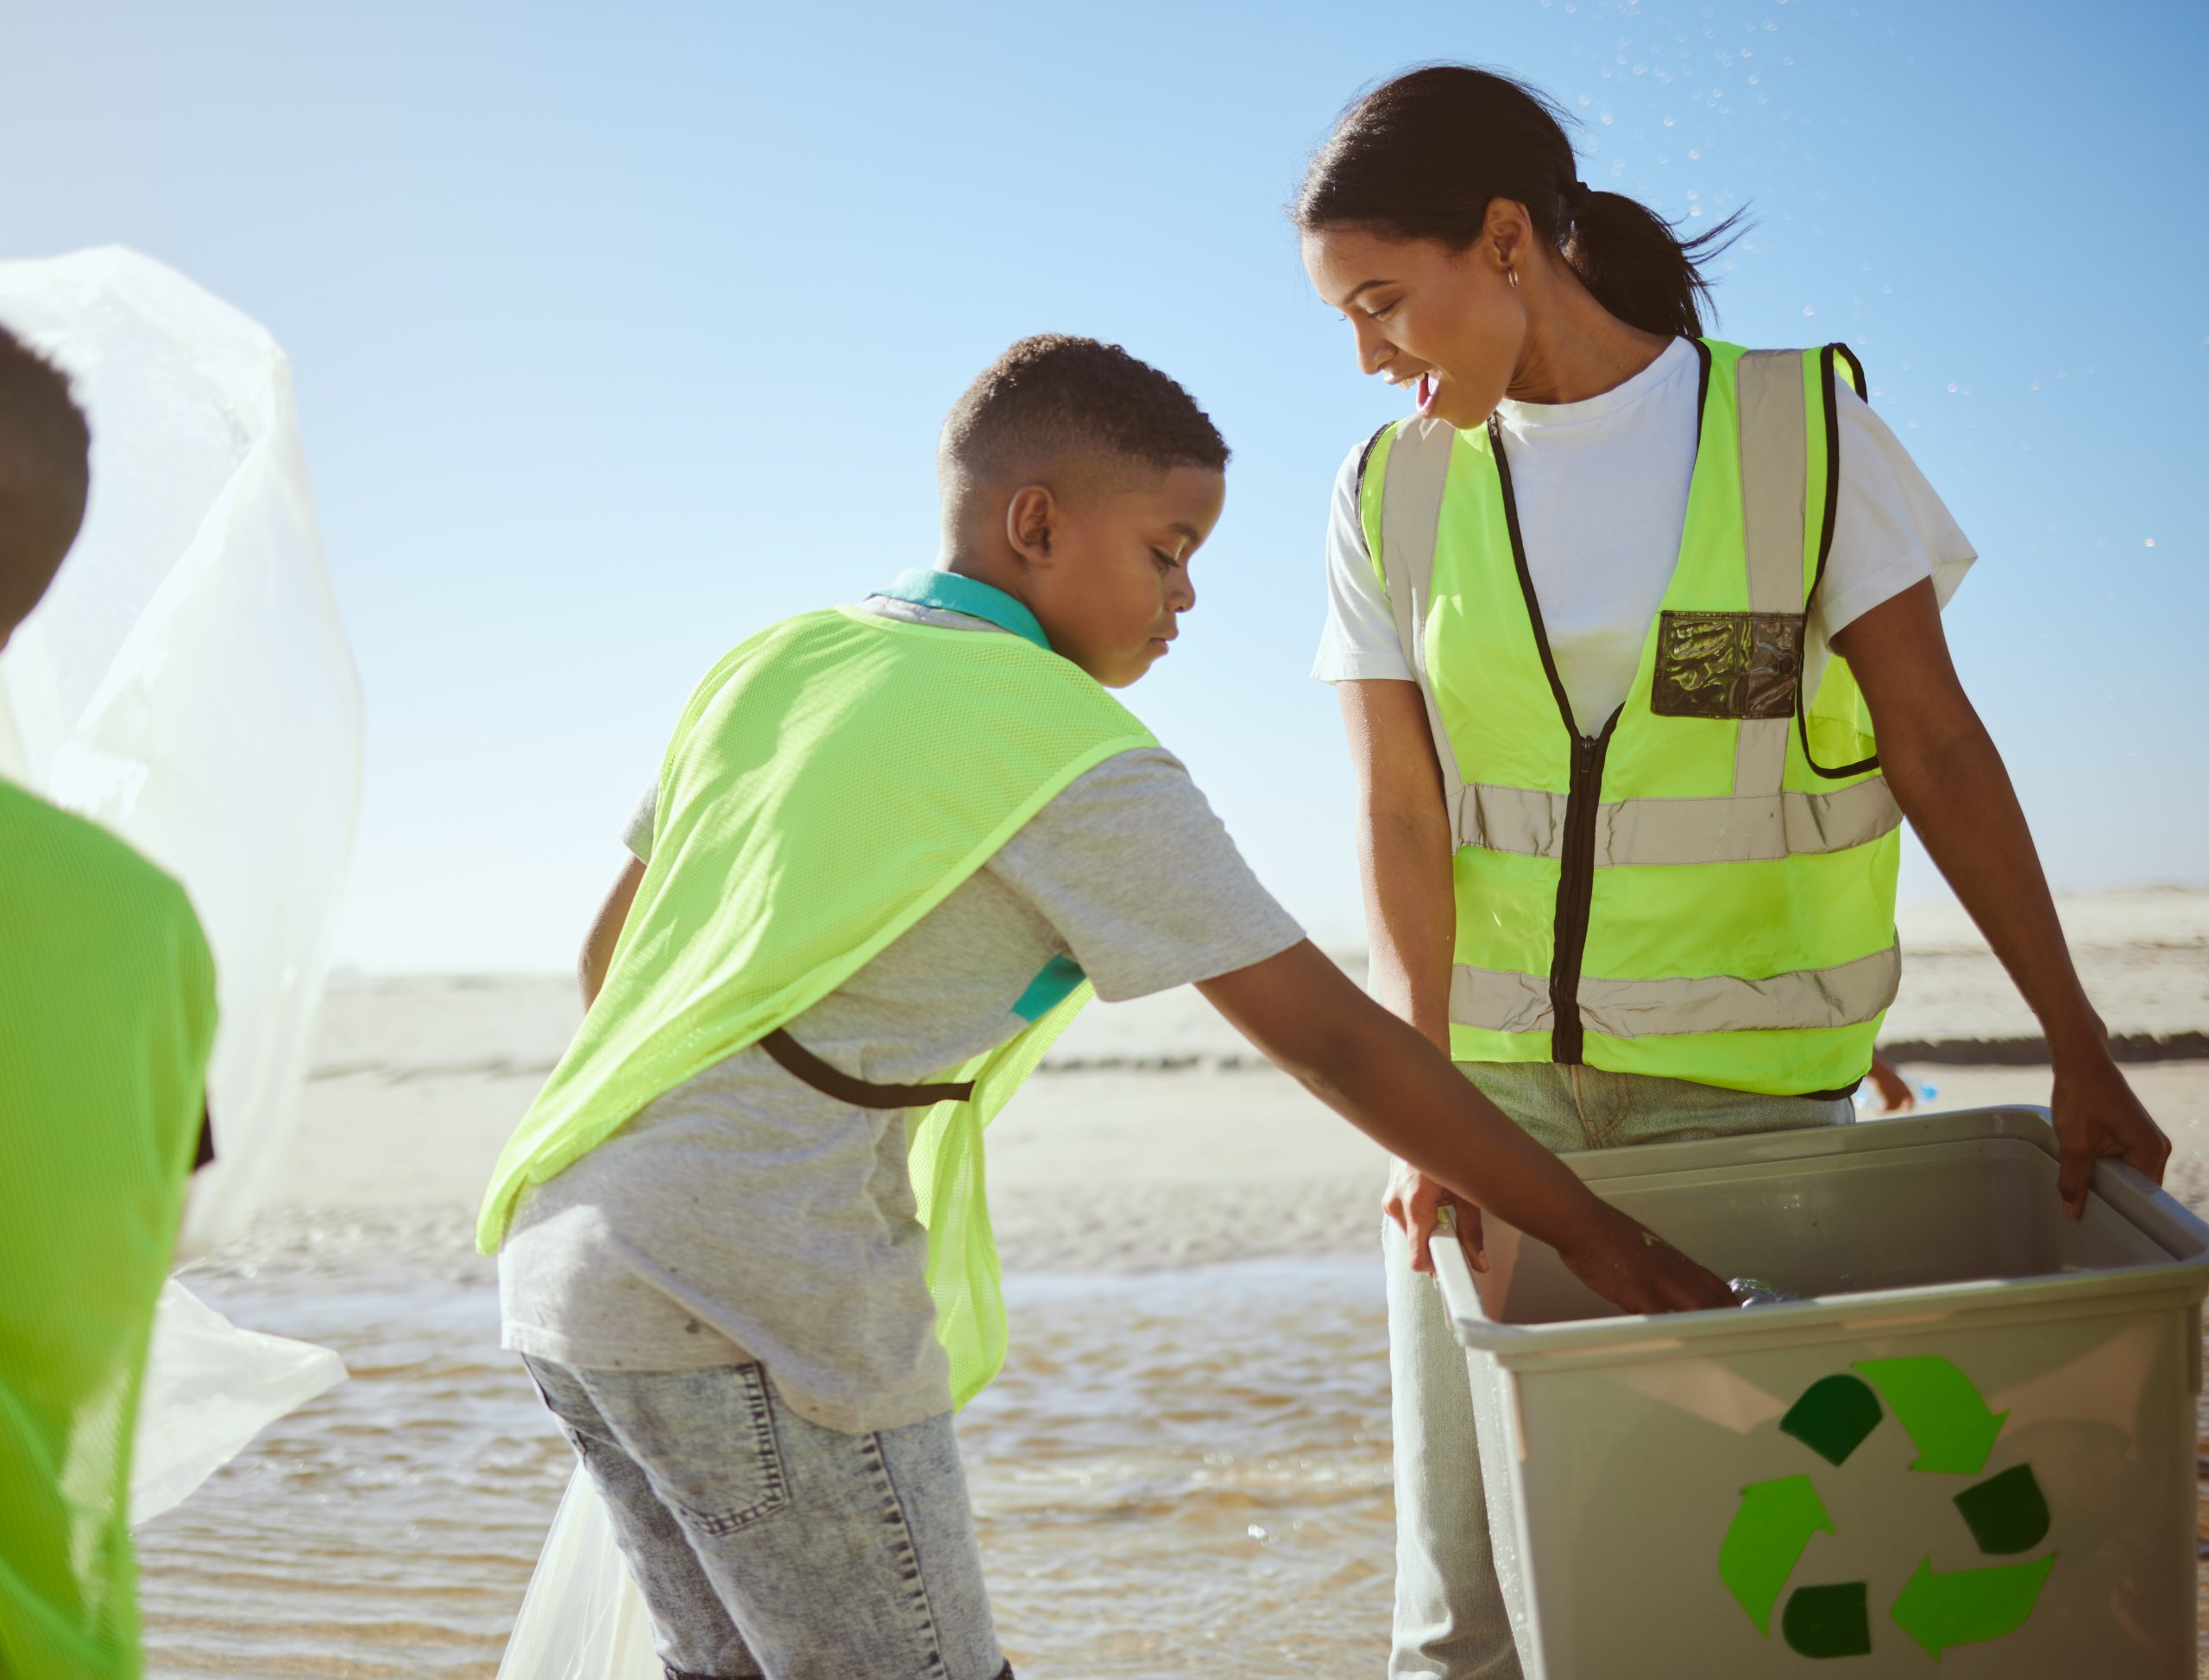 University student helping children recycled and beach clean during community beach clean event run by Business and Biolab Sustainability Society